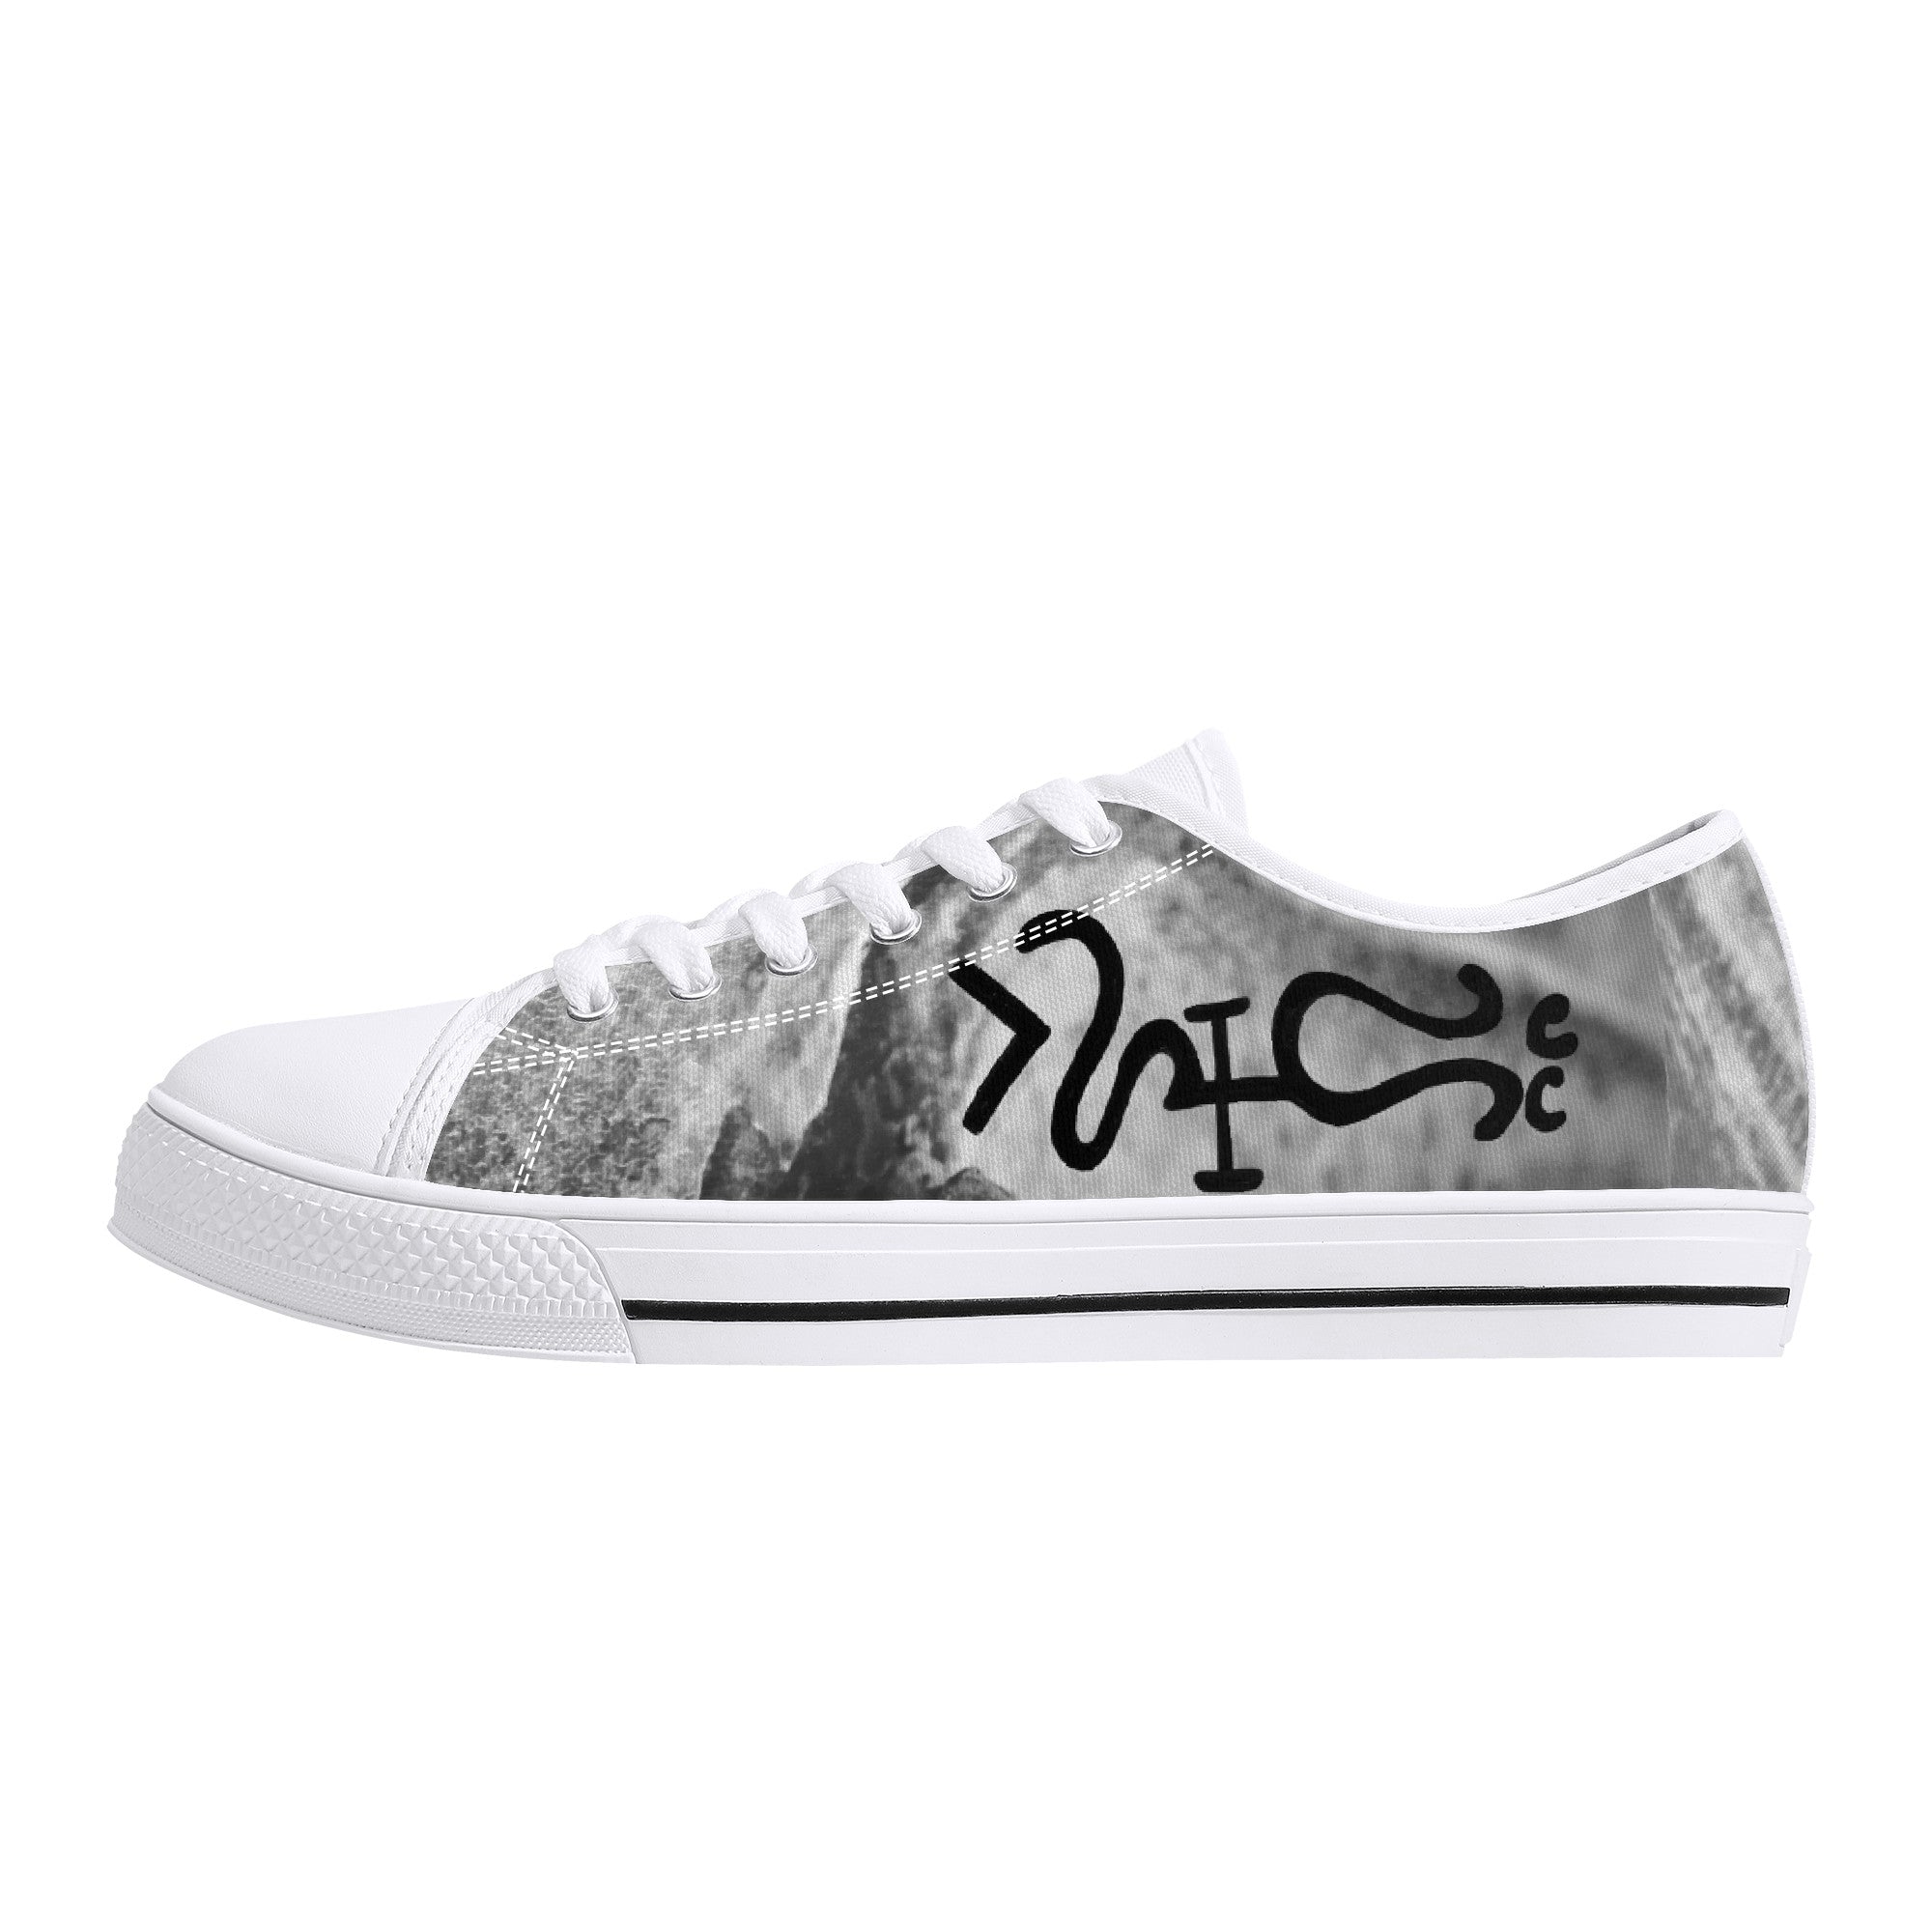 We thank you | Customized Low-Top Canvas Shoes - White - Shoe Zero